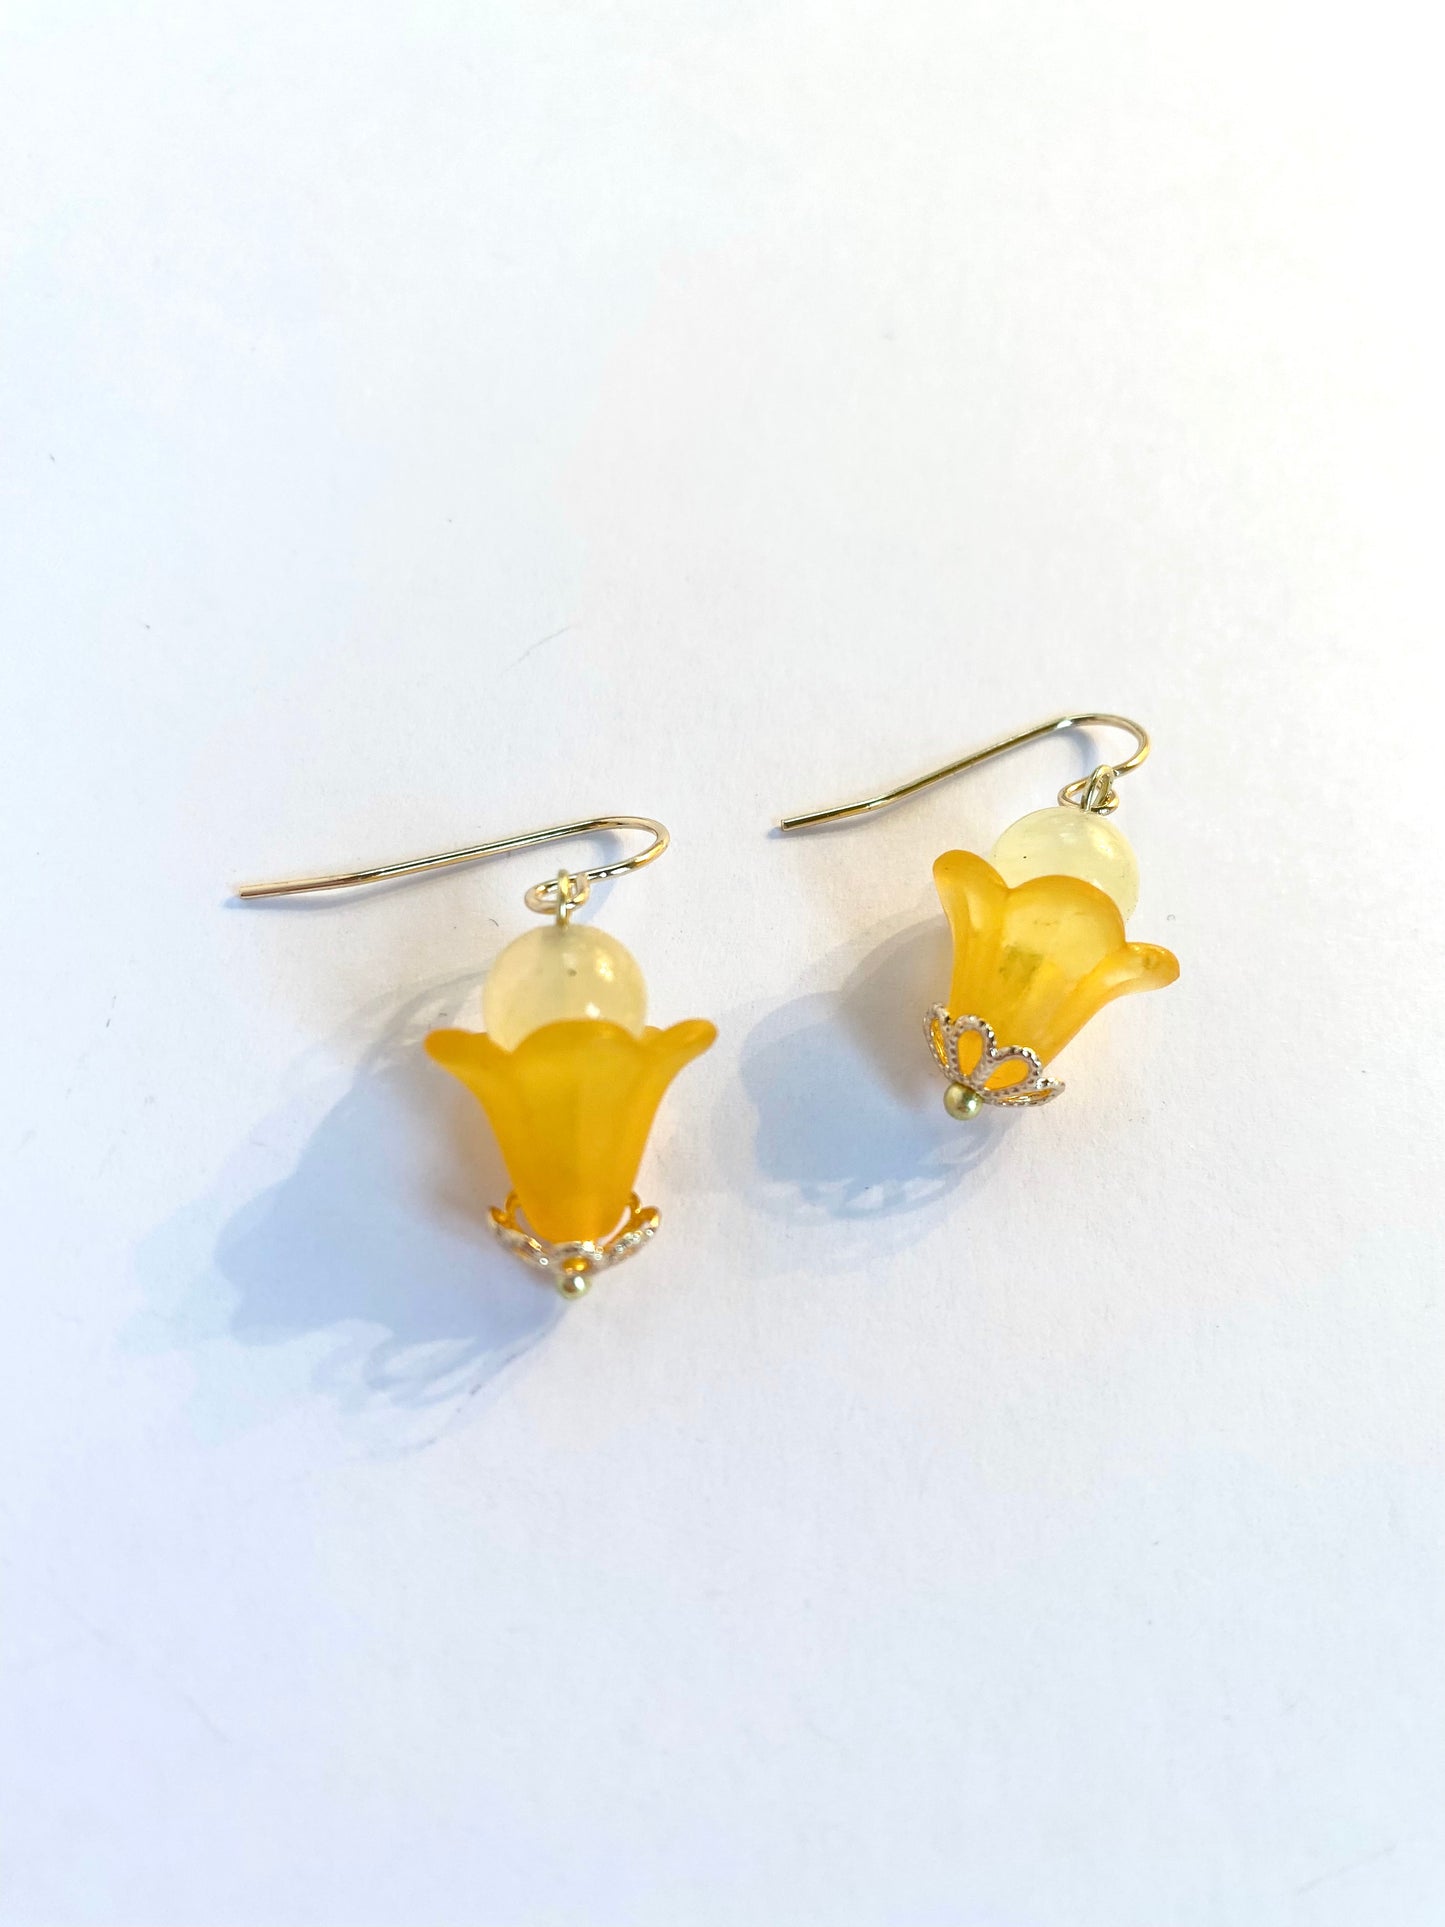 Yellow and Marigold Flower Earrings